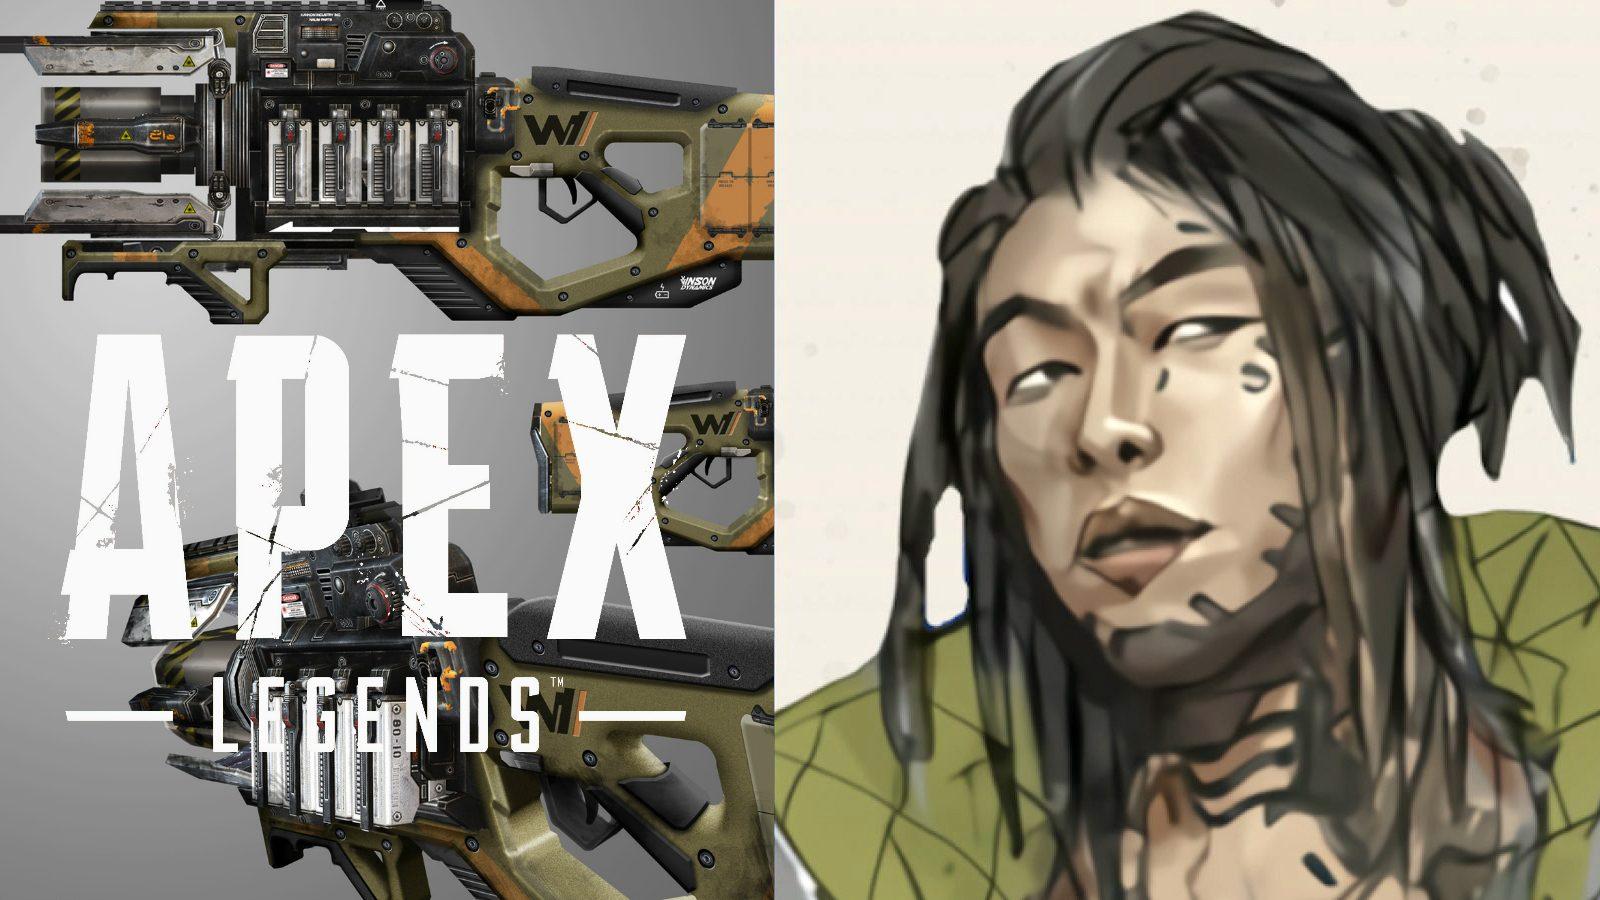 First look at Crypto and charge rifle leaked ahead of Apex